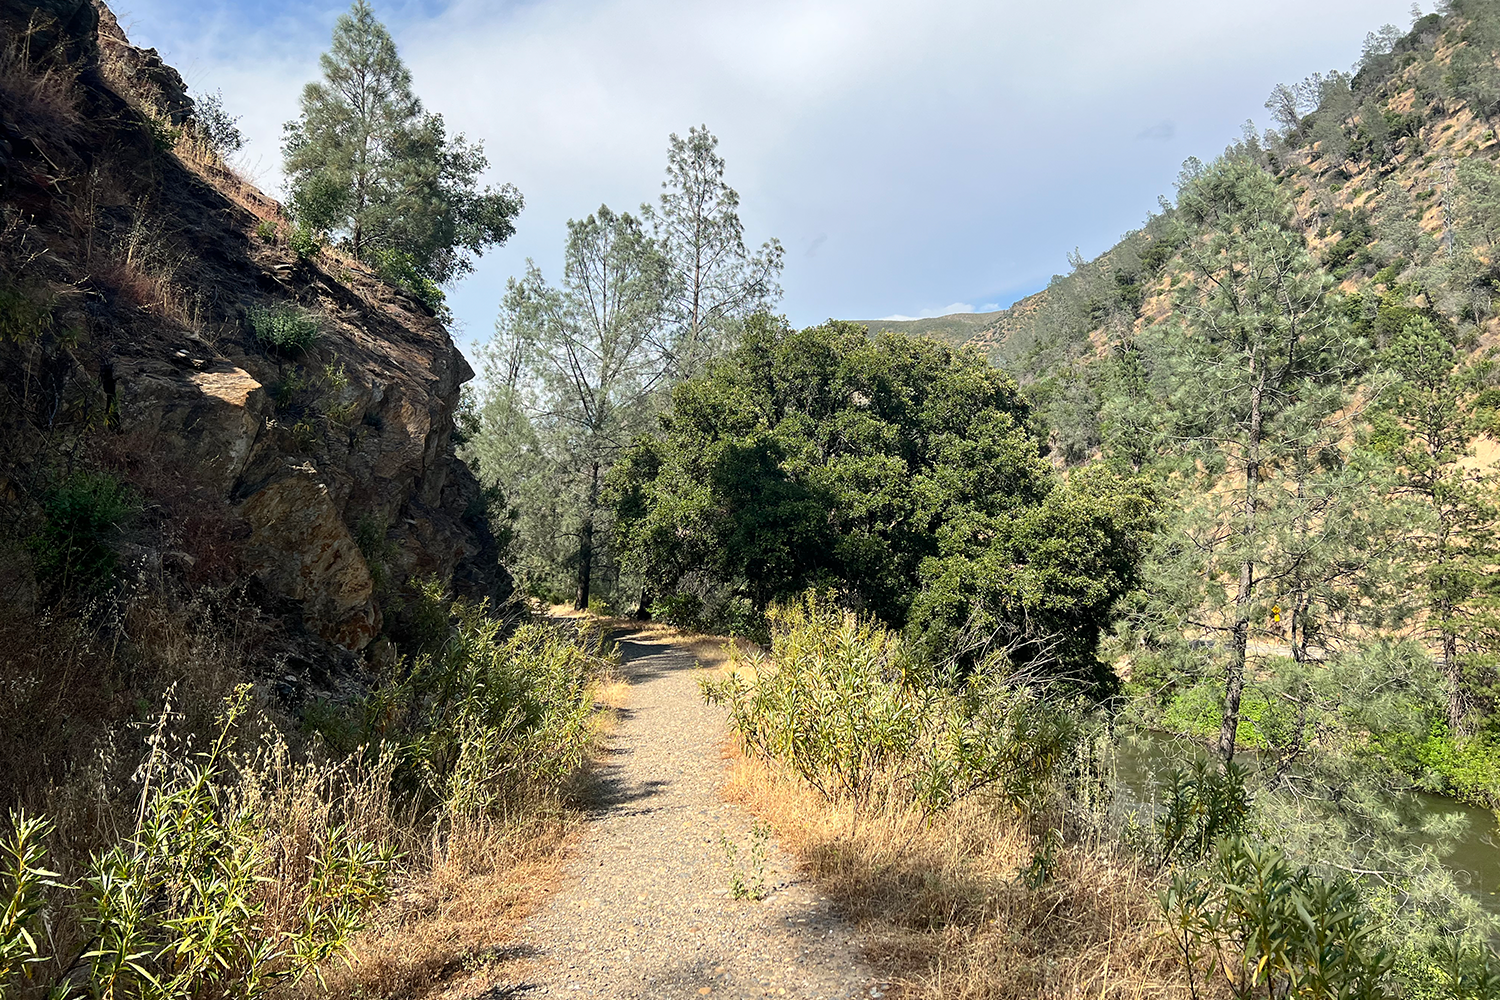 There's no shortage of trails to explore outside the park